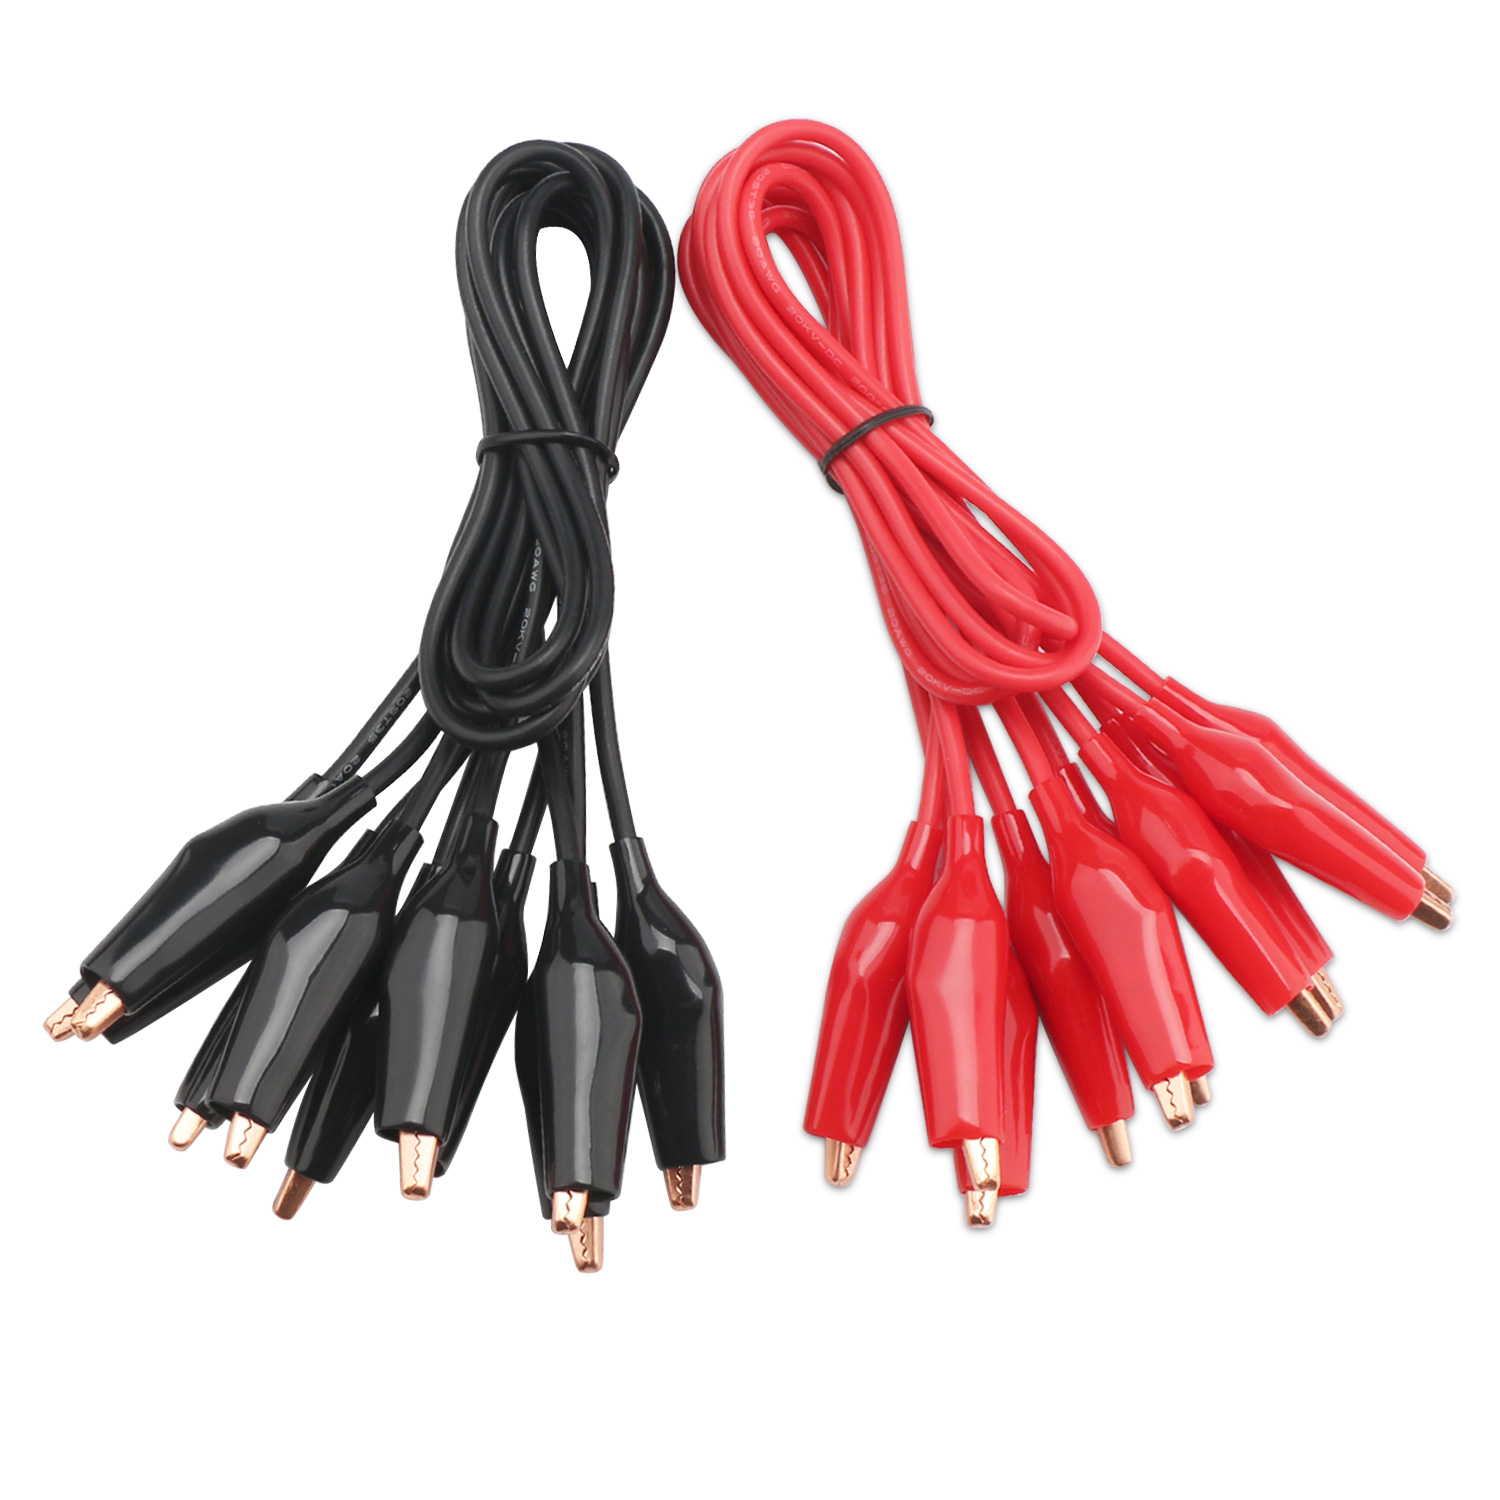 10 Pcs/kit Black Red Alligator Clips Crocodile Battery Charger Clamps Test Leads 